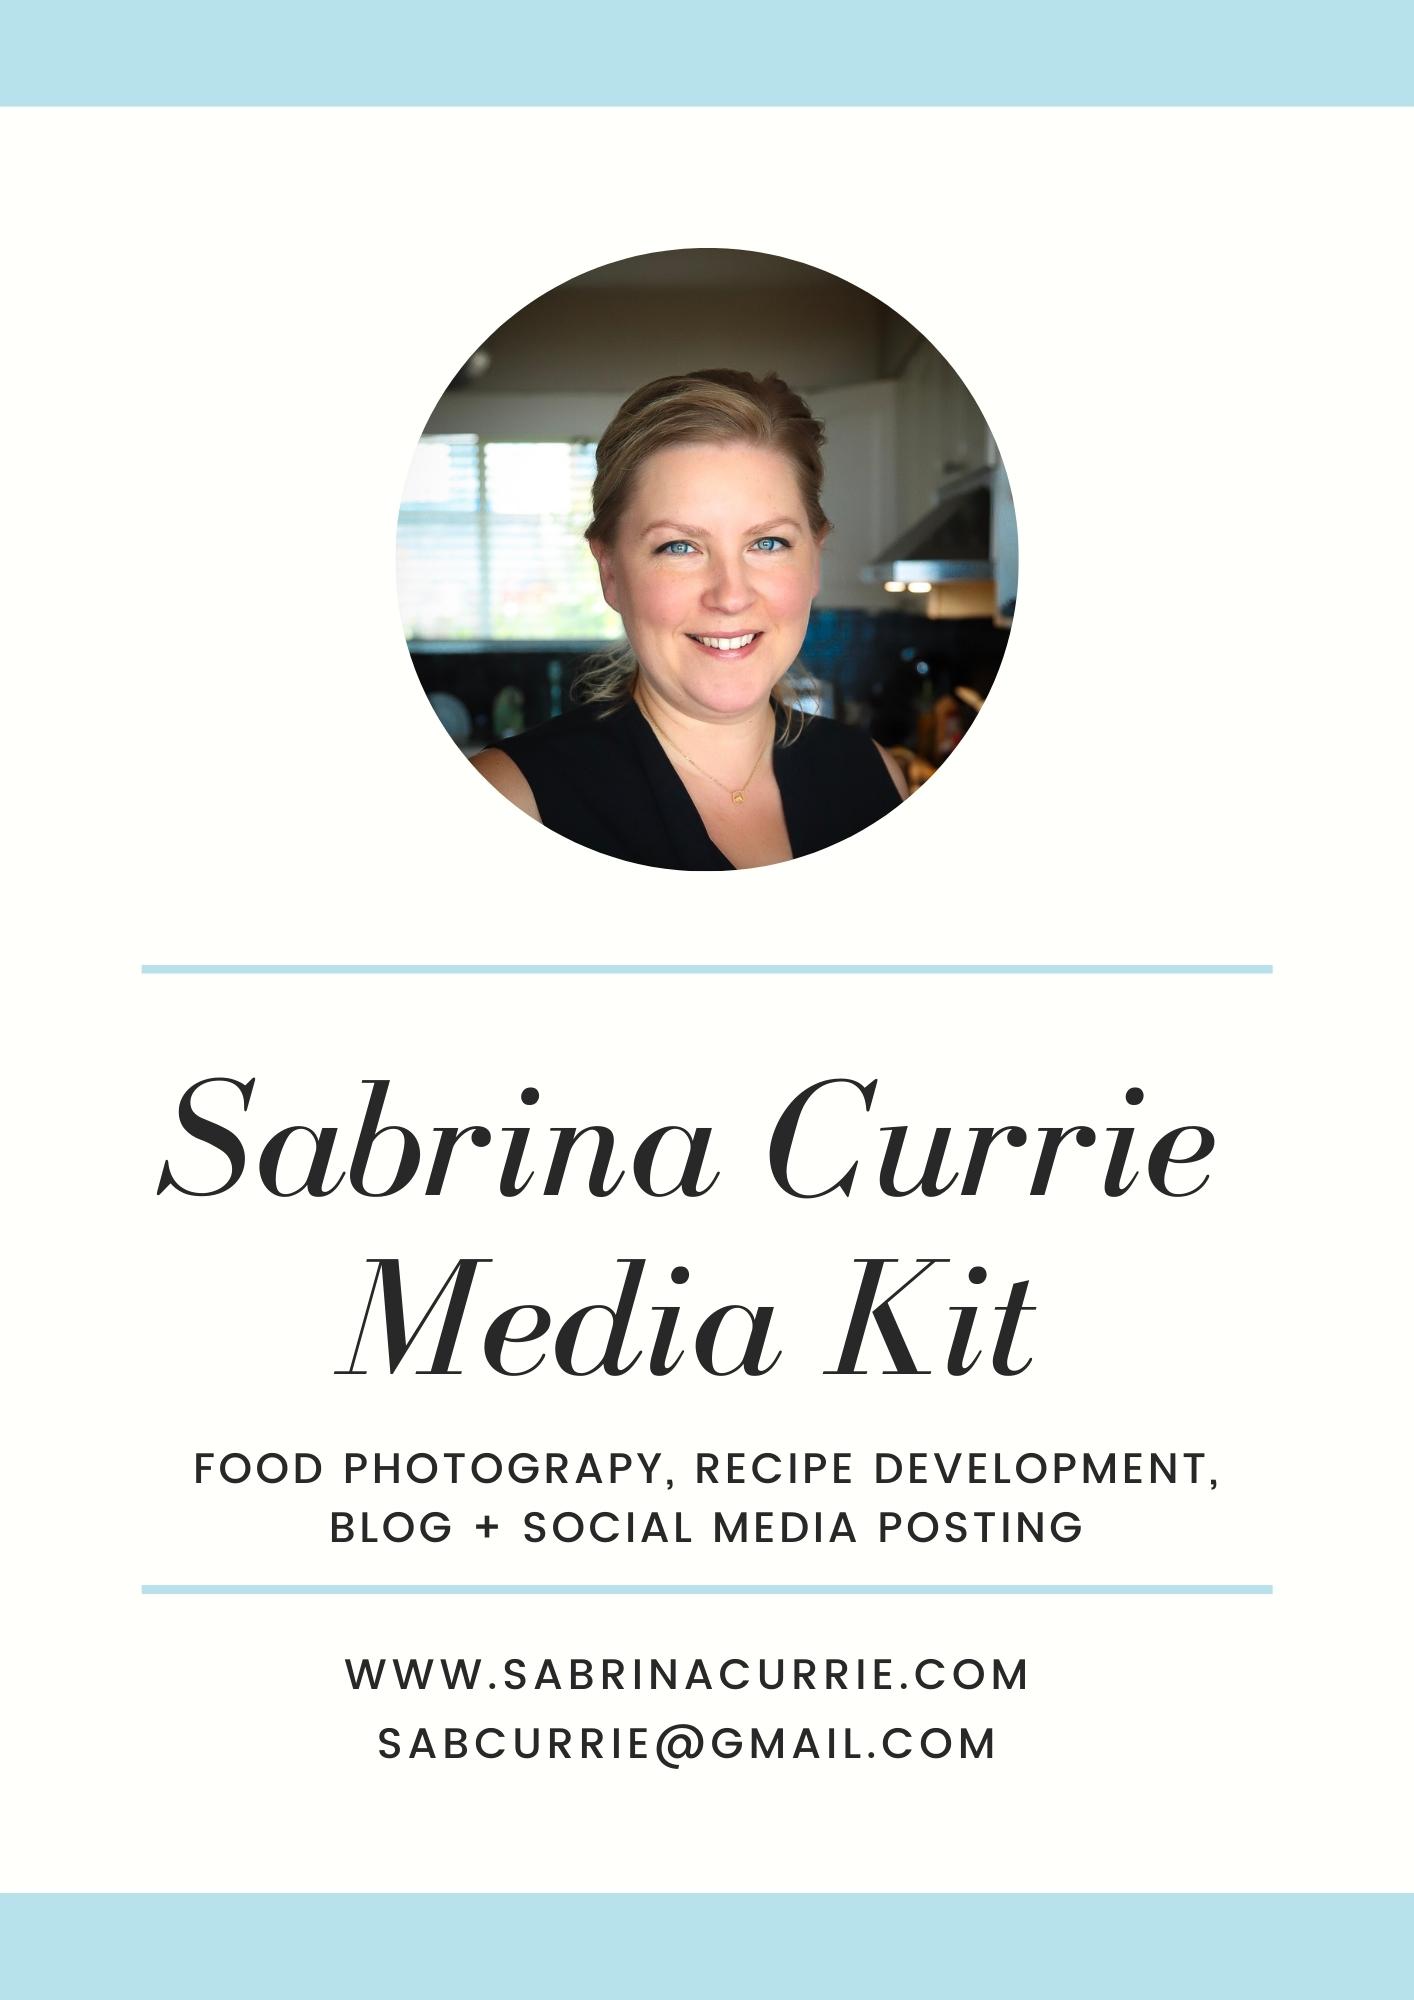 Page 1 of Sabrina Currie's media kit. It has name, email and photo of Sabrina.